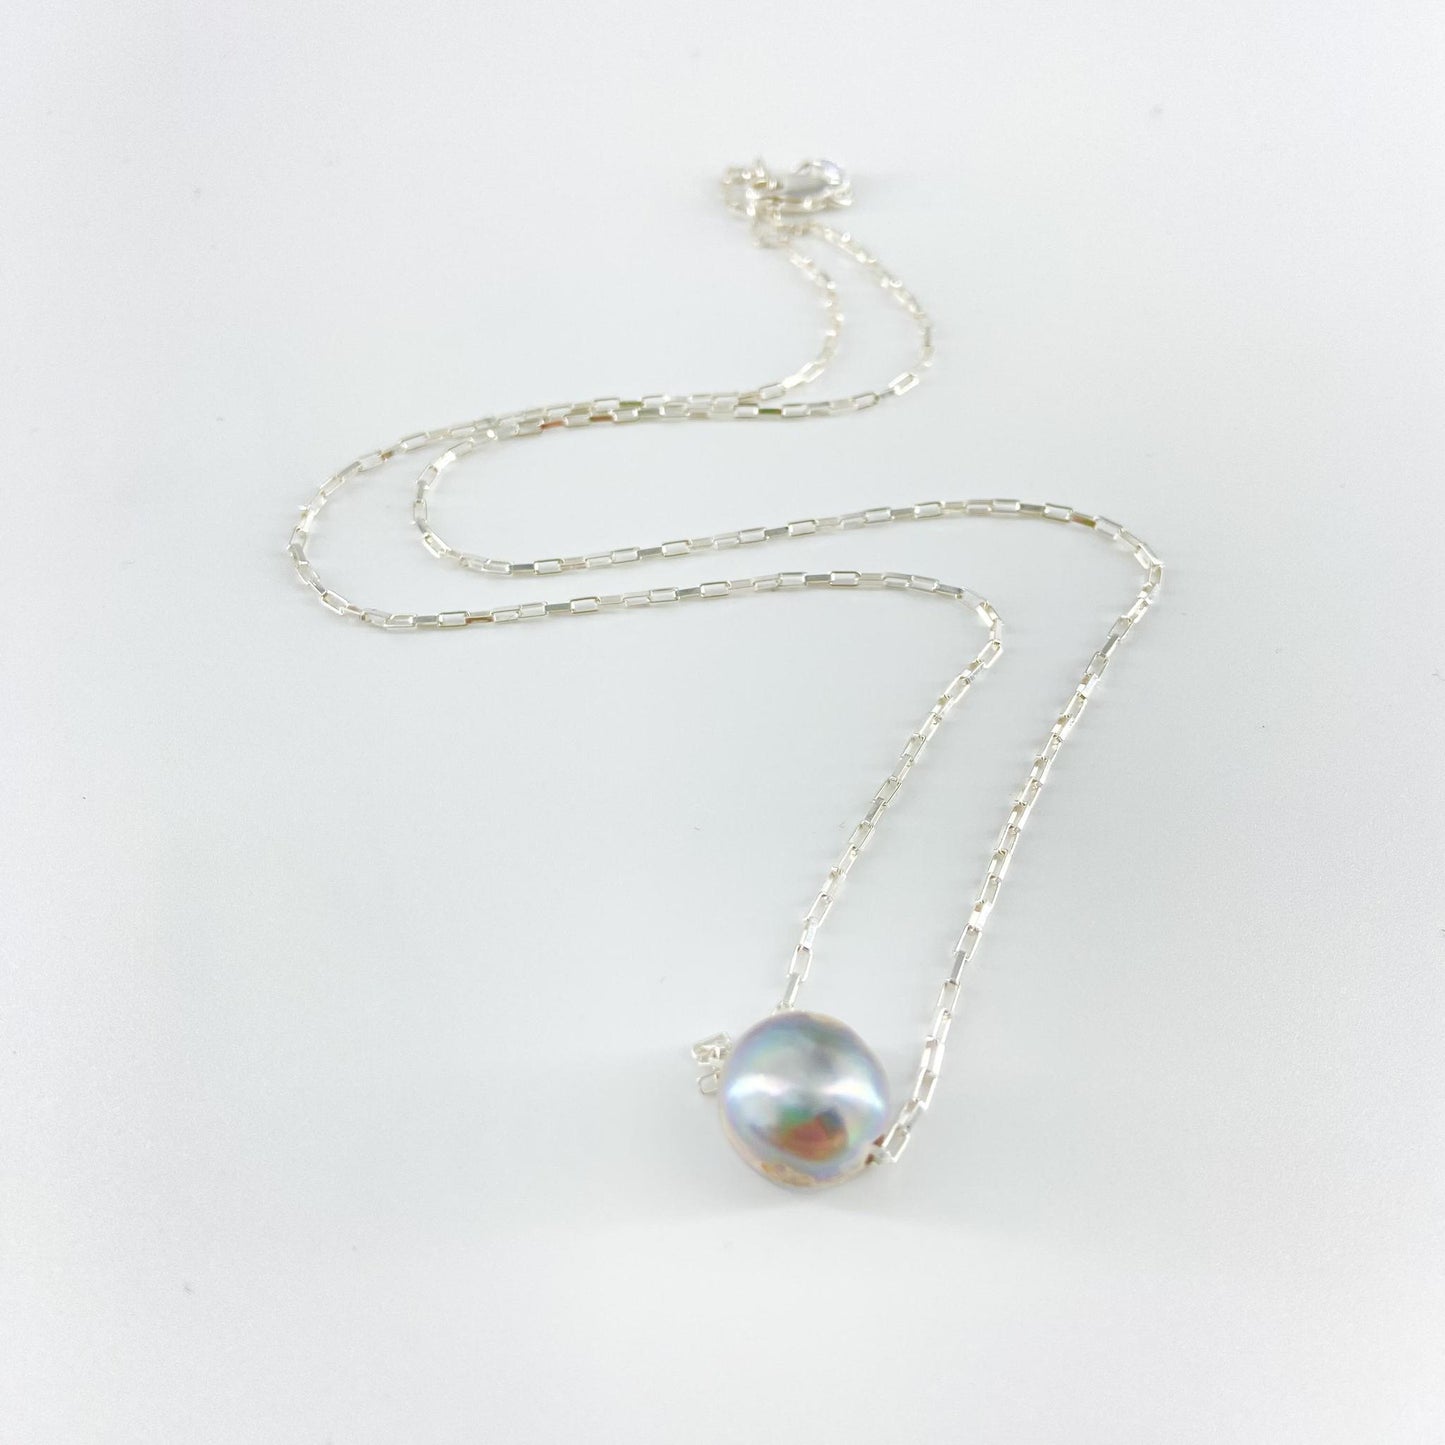 Necklace - Grey Pearl on Sterling Chain - 18"